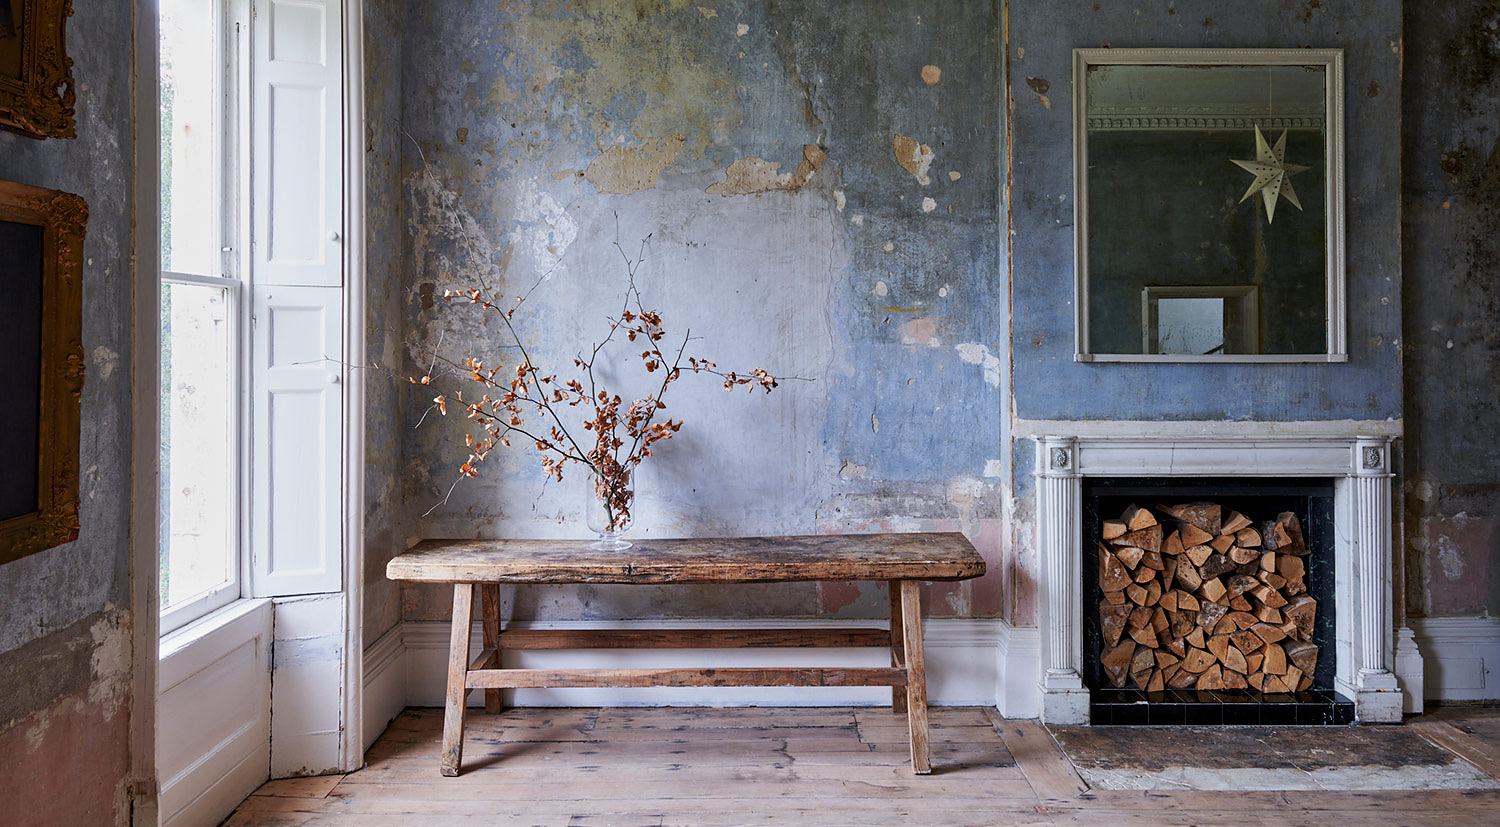 Dining room with beautiful distressed walls and large windows in a Georgian house in Bath